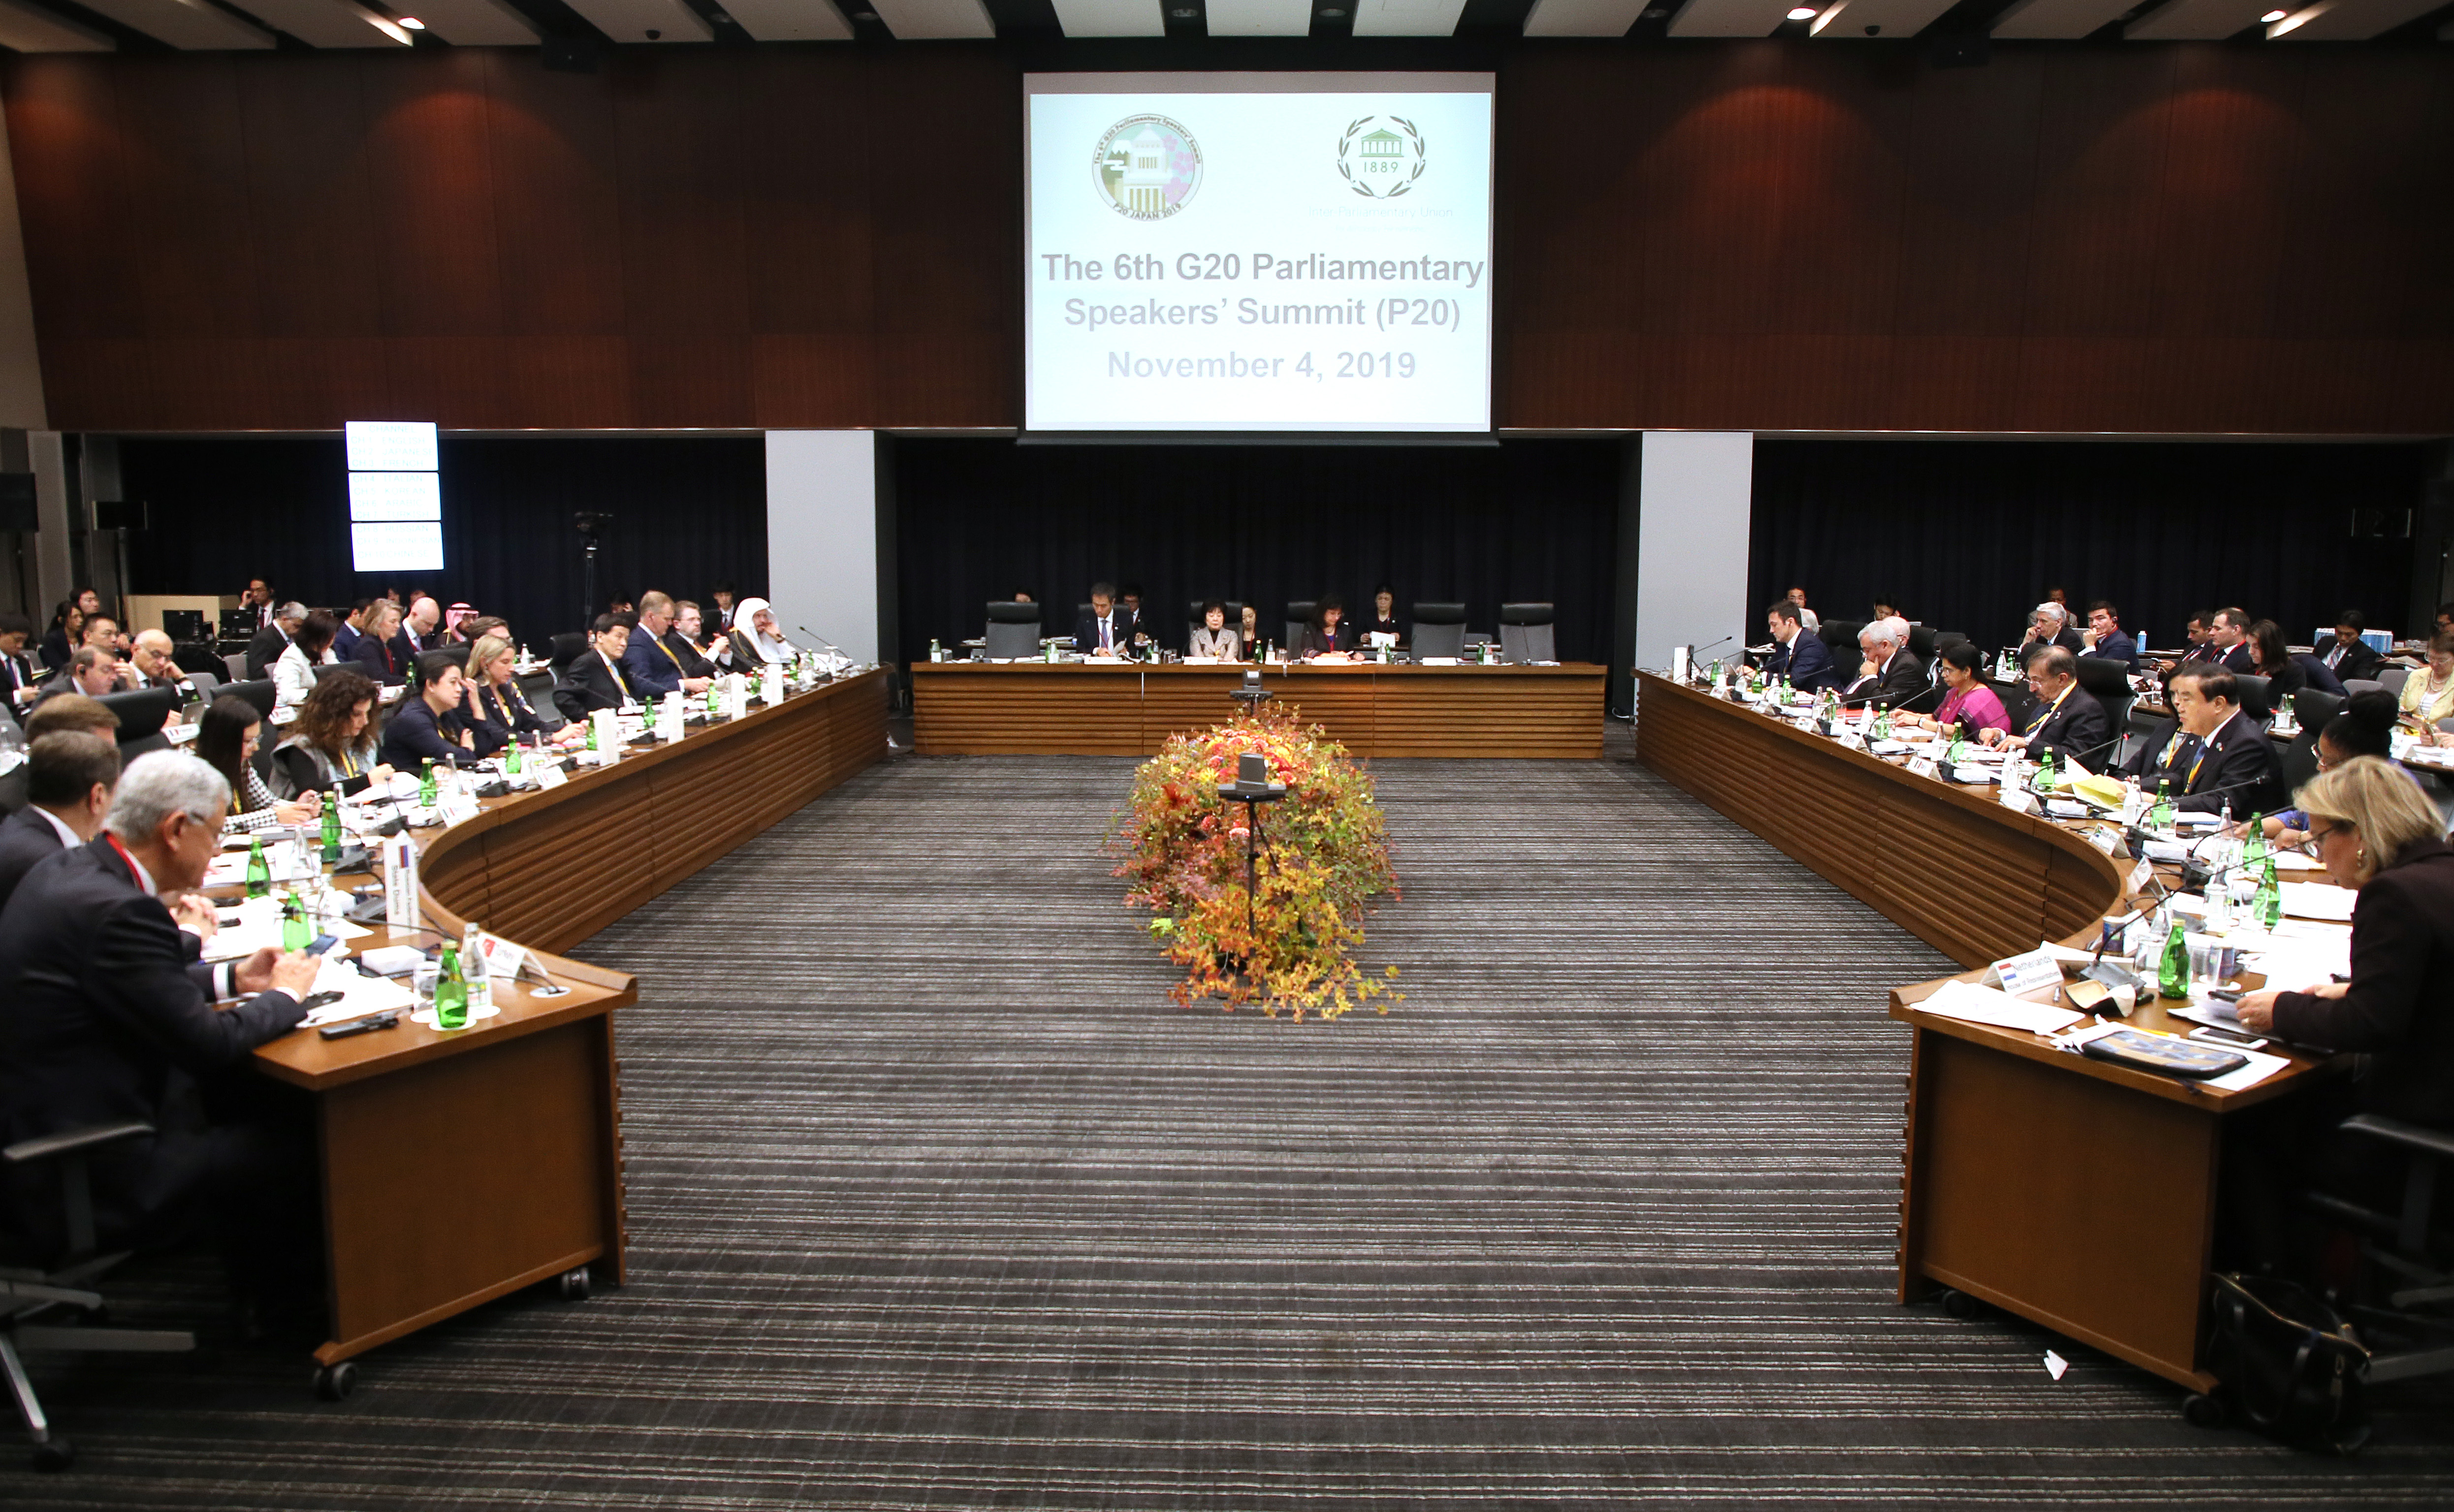 [Nov 5] The 6th G20 Parliamentary Speakers’ Summit (P20) takes place in Tokyo, Japan, on November 4, 2019